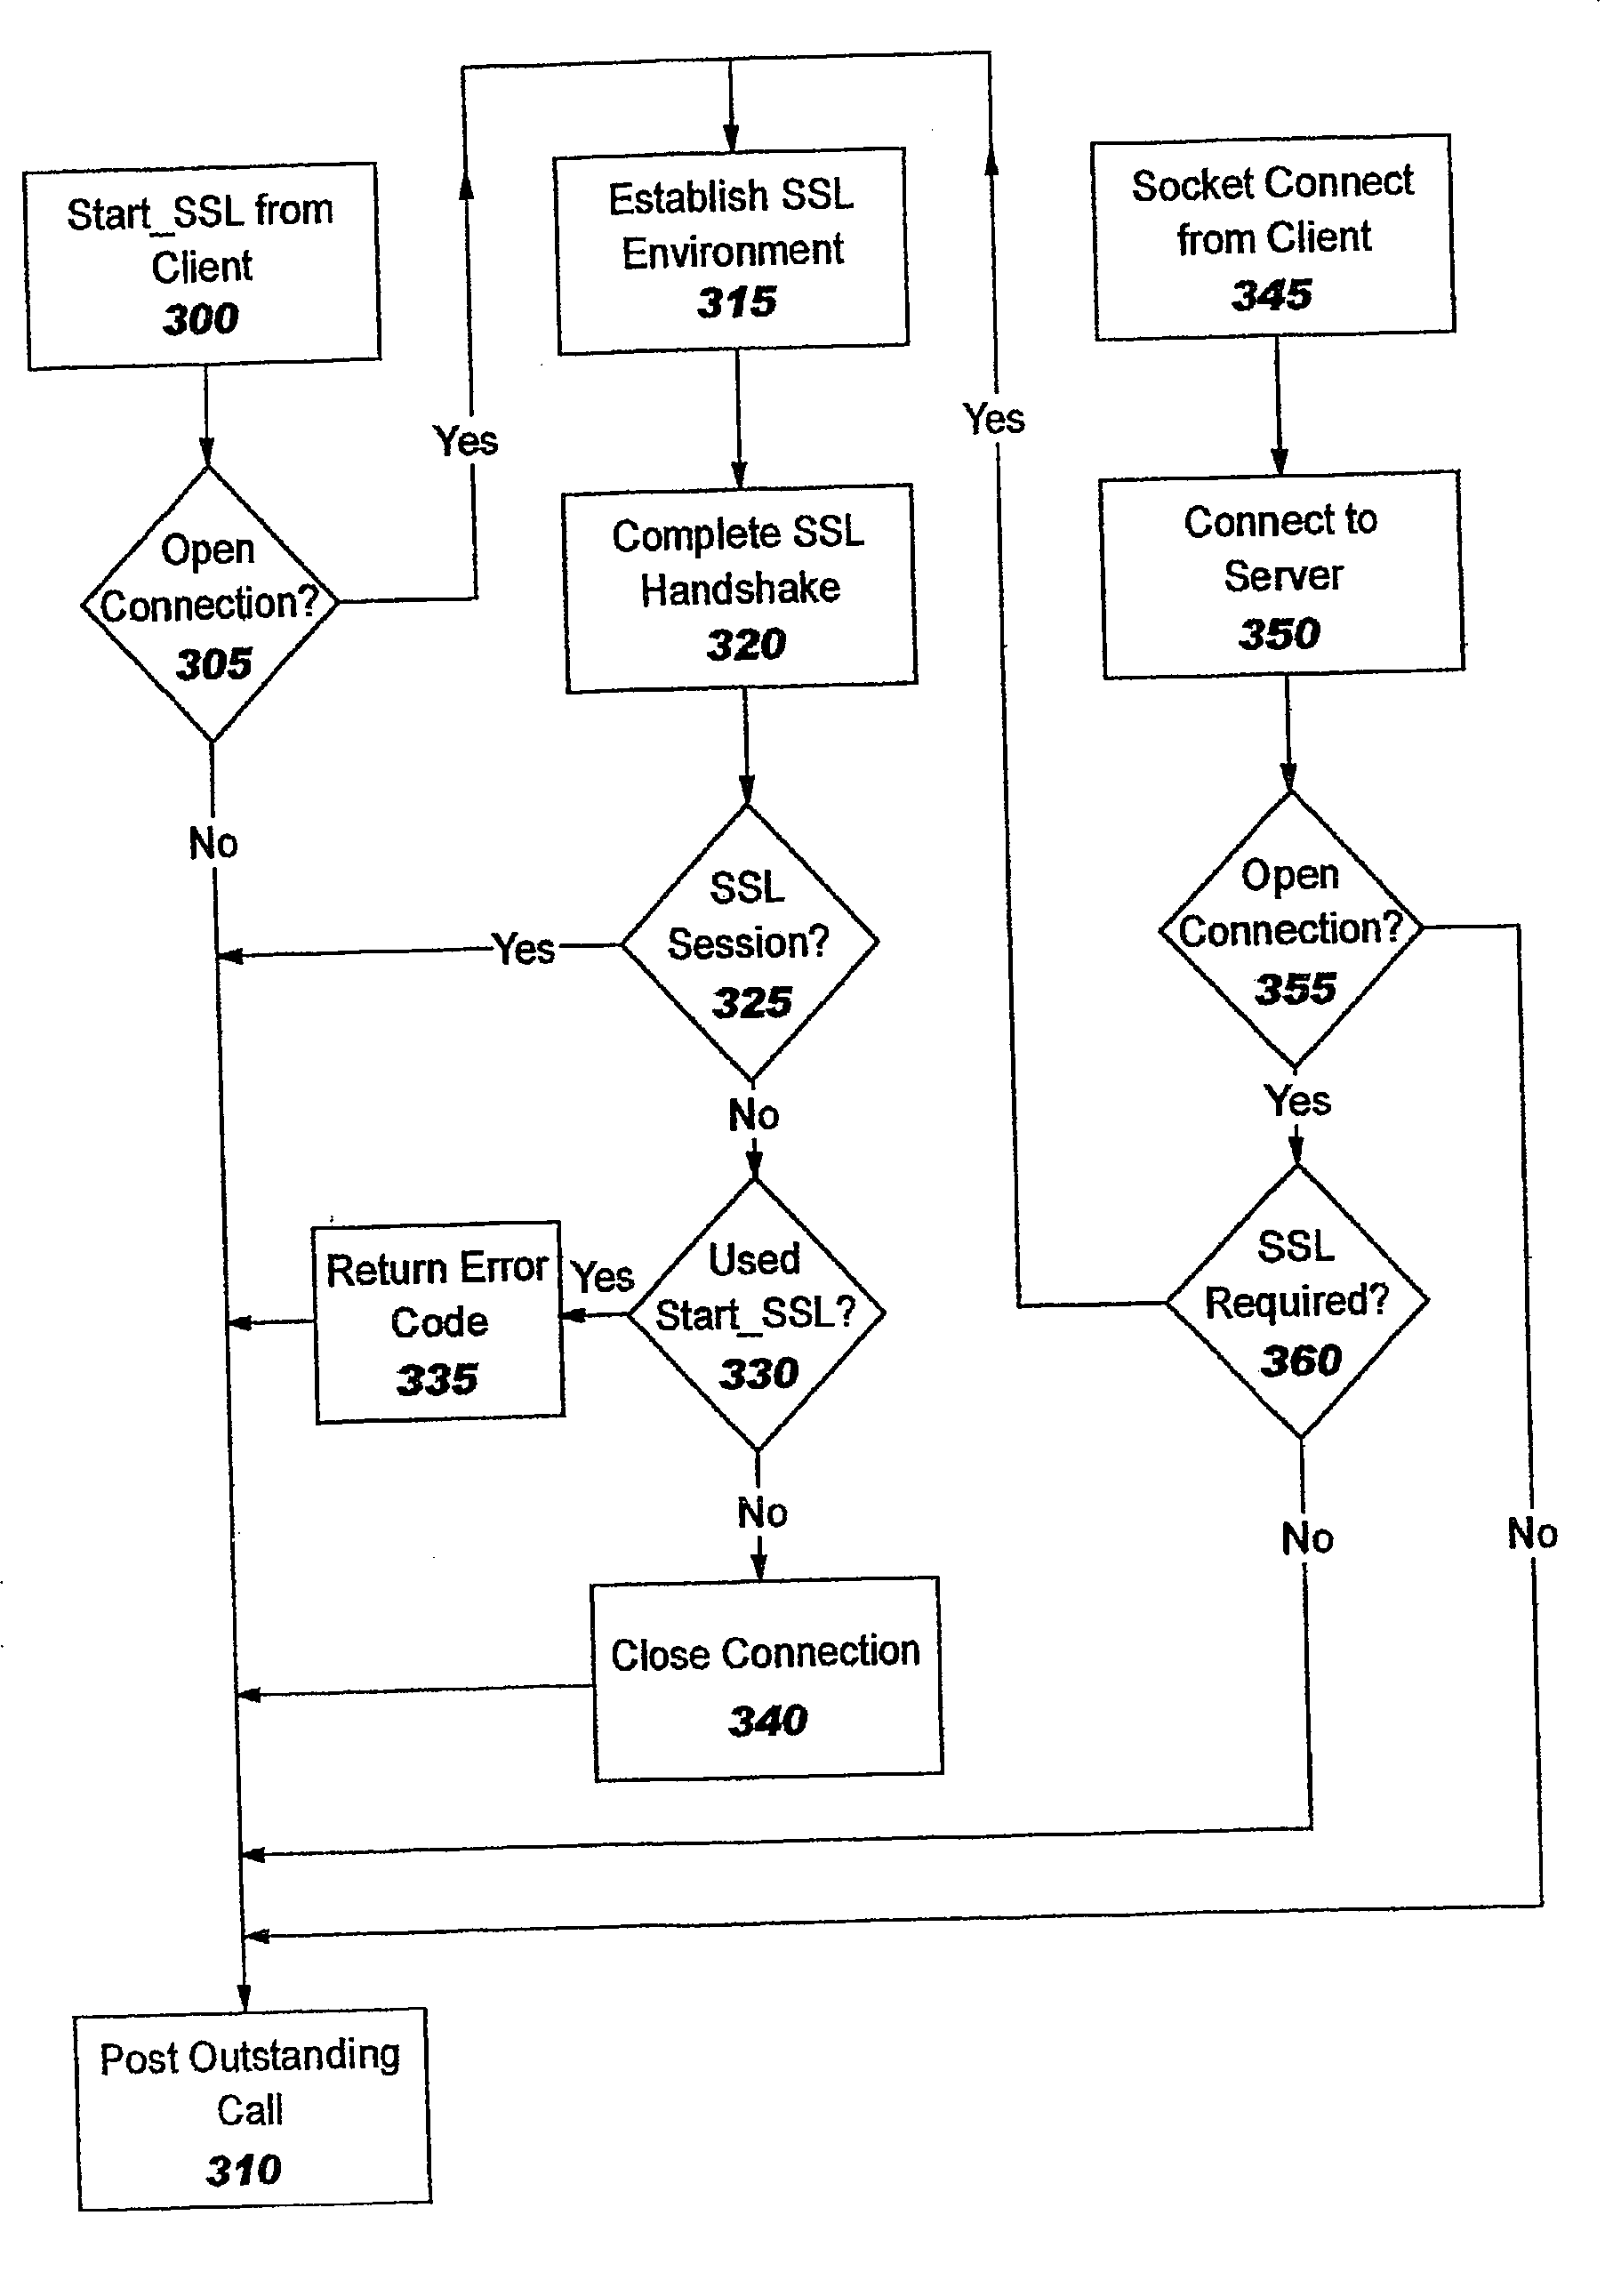 Offload Processing for Secure Data Transfer